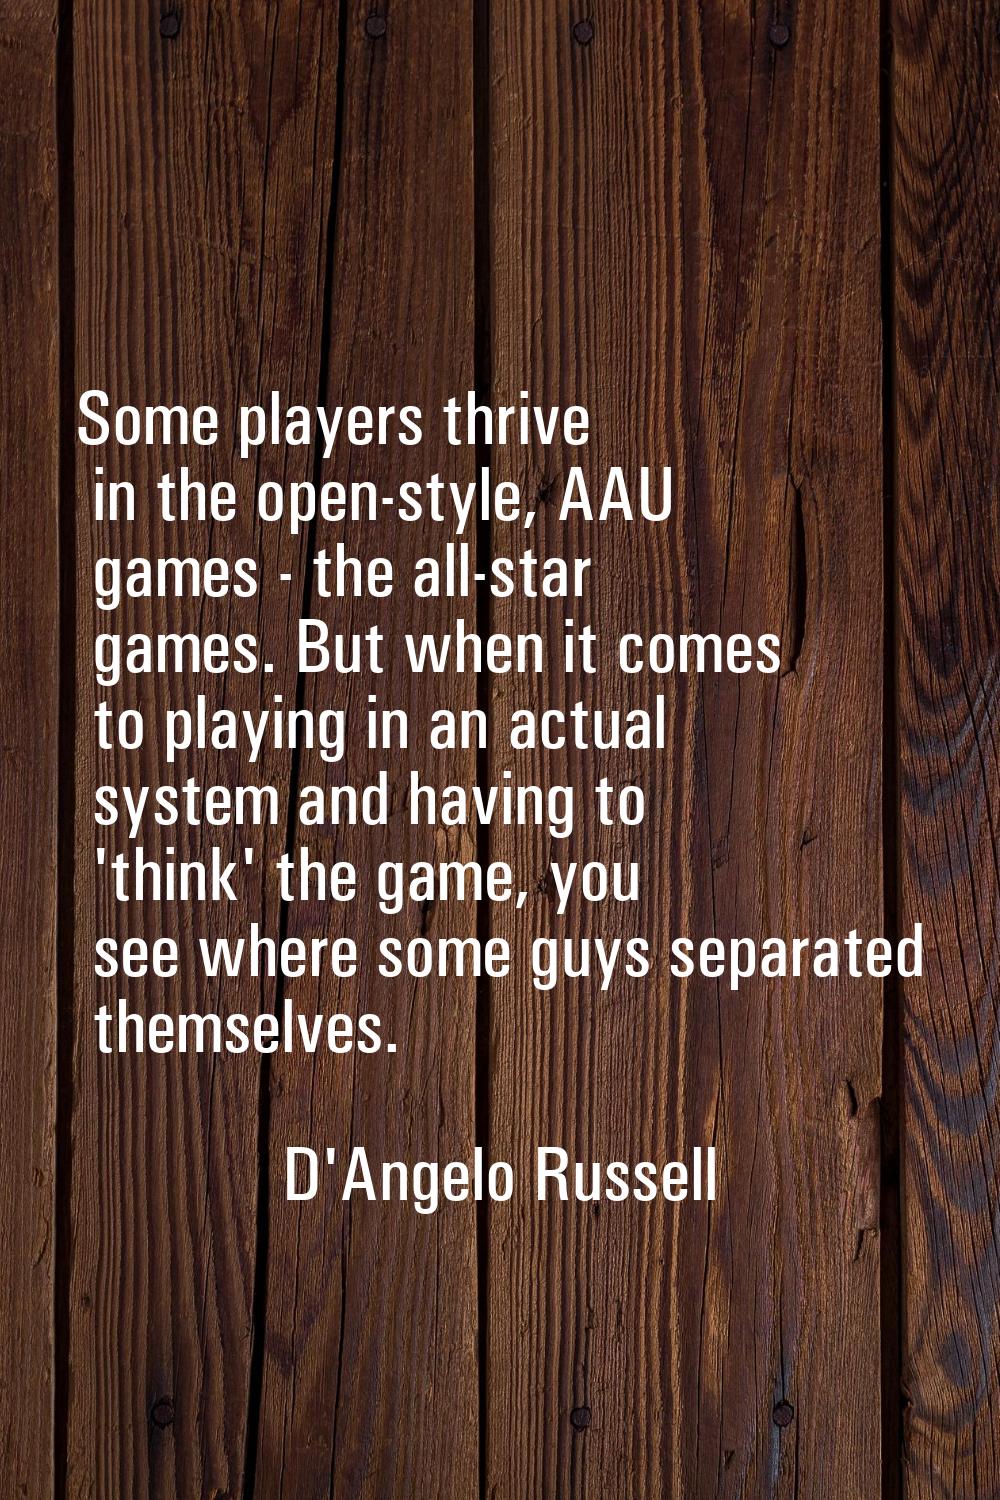 Some players thrive in the open-style, AAU games - the all-star games. But when it comes to playing